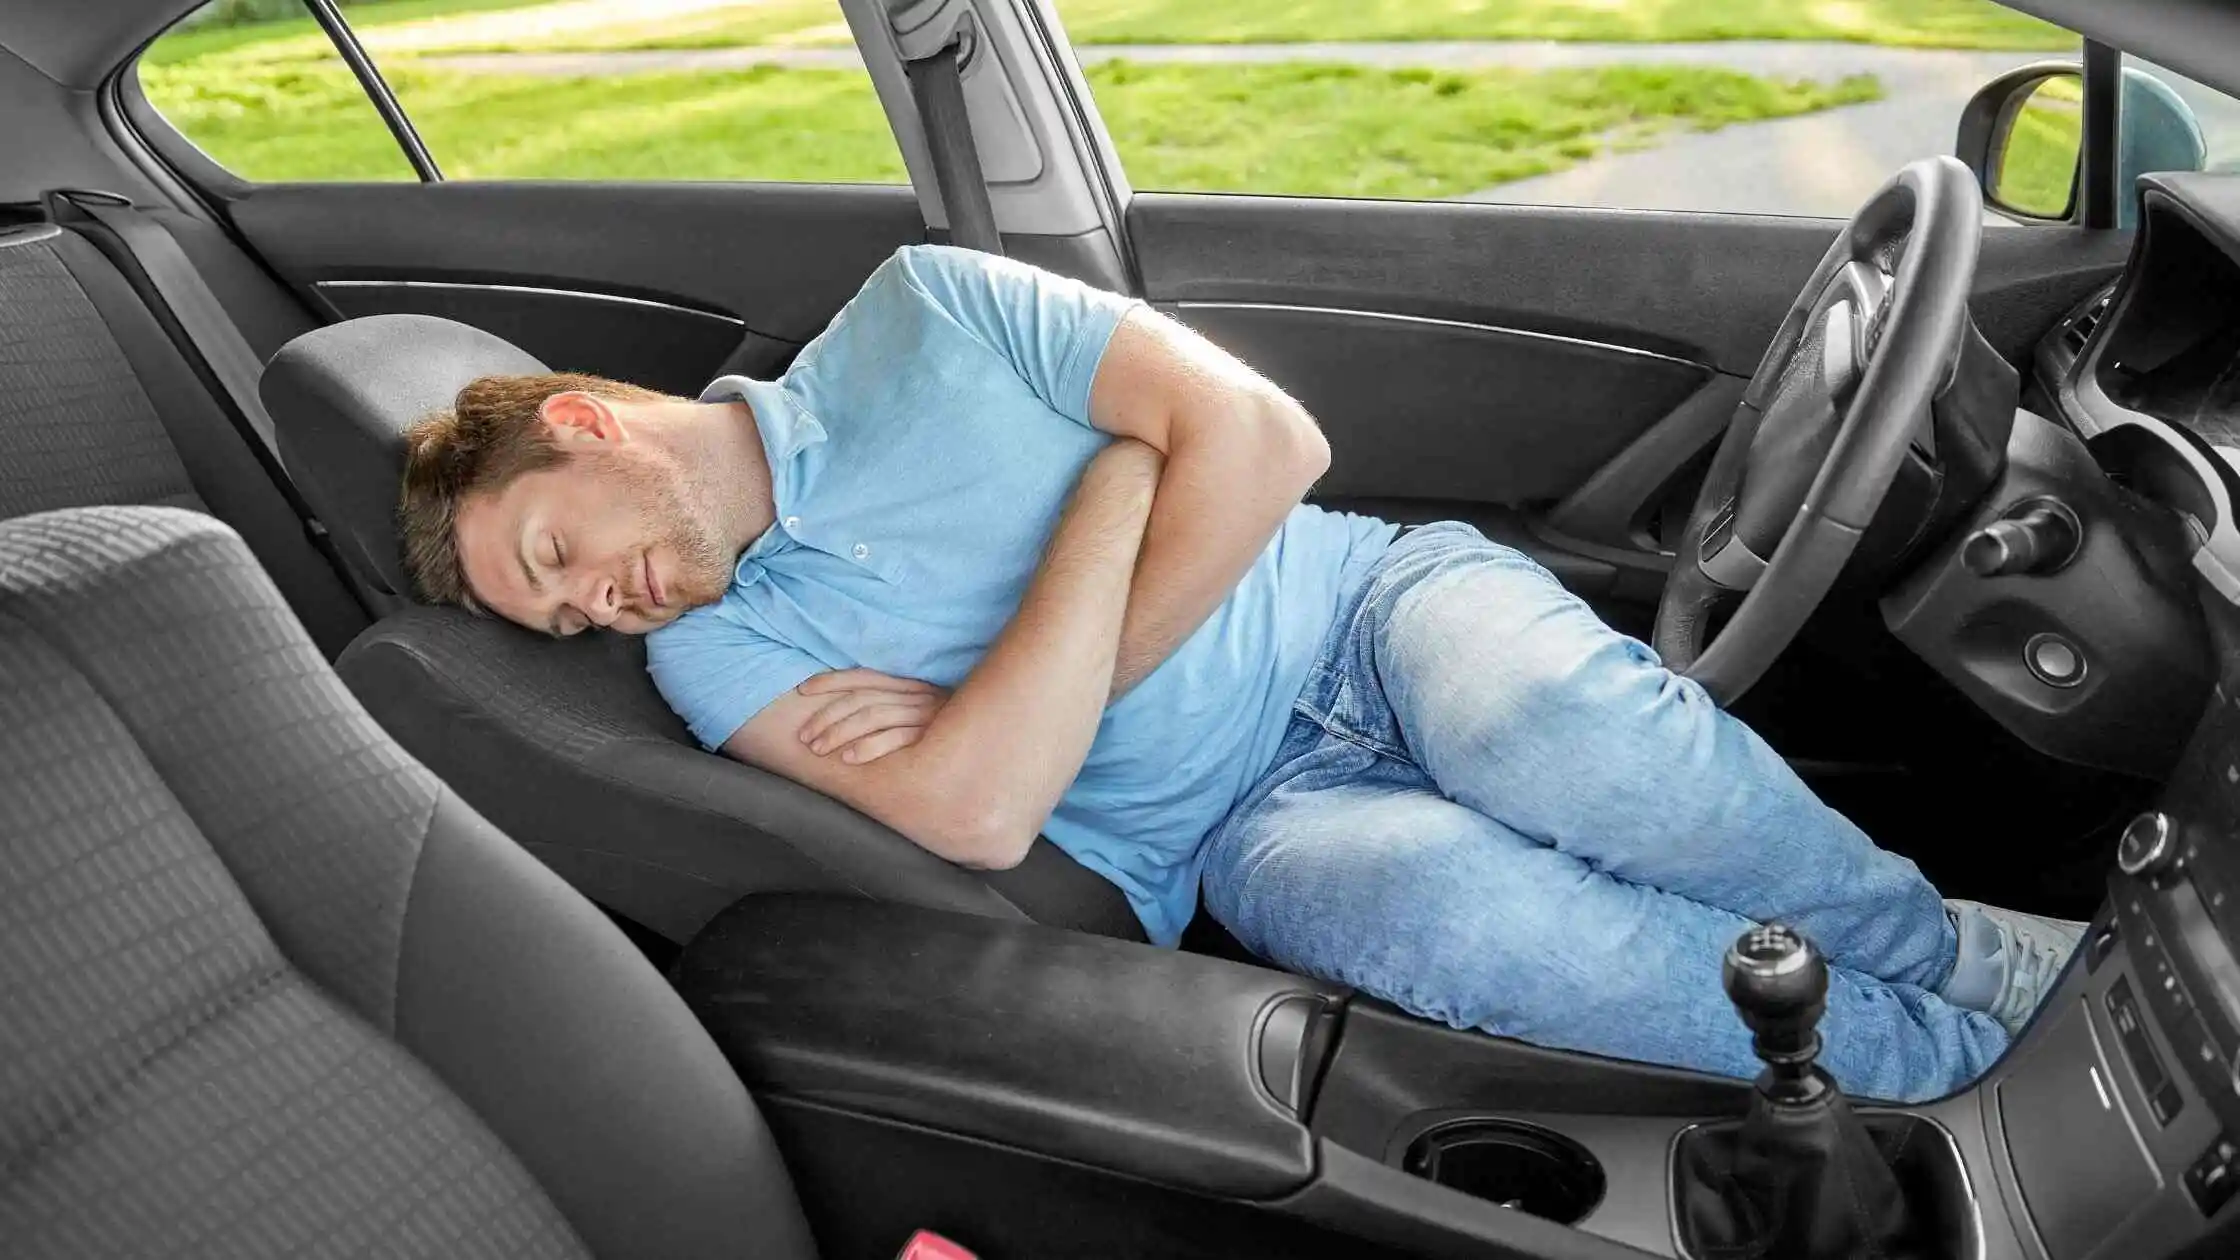 Is It Illegal to Sleep in Your Car? Understanding the Laws and Considerations